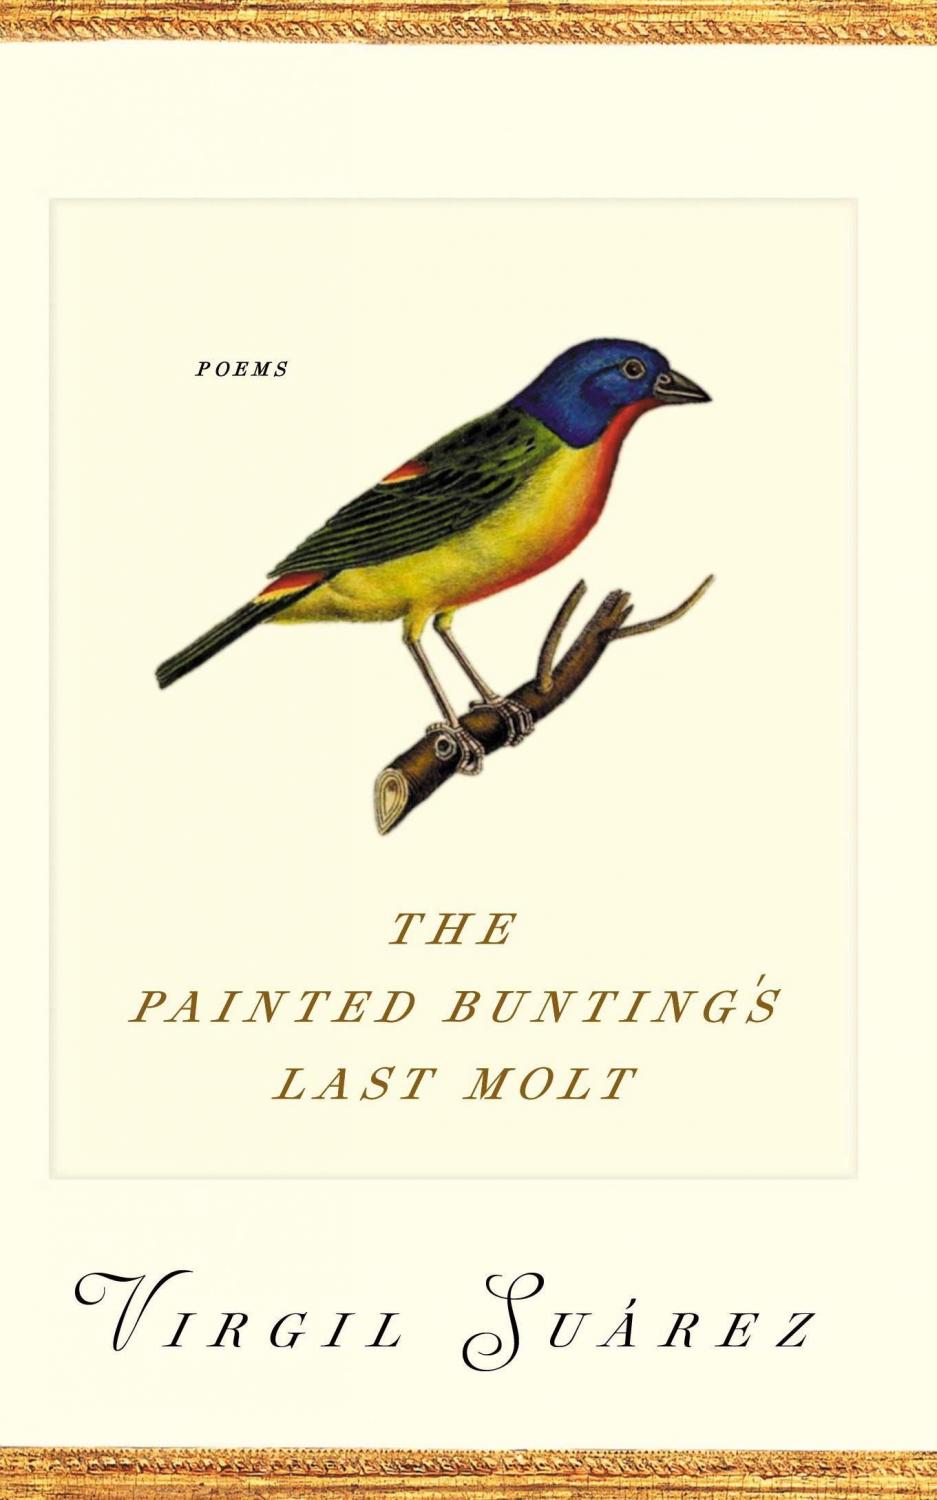 Virgil Suarez's The Painted Bunting's Last Molt Book Cover